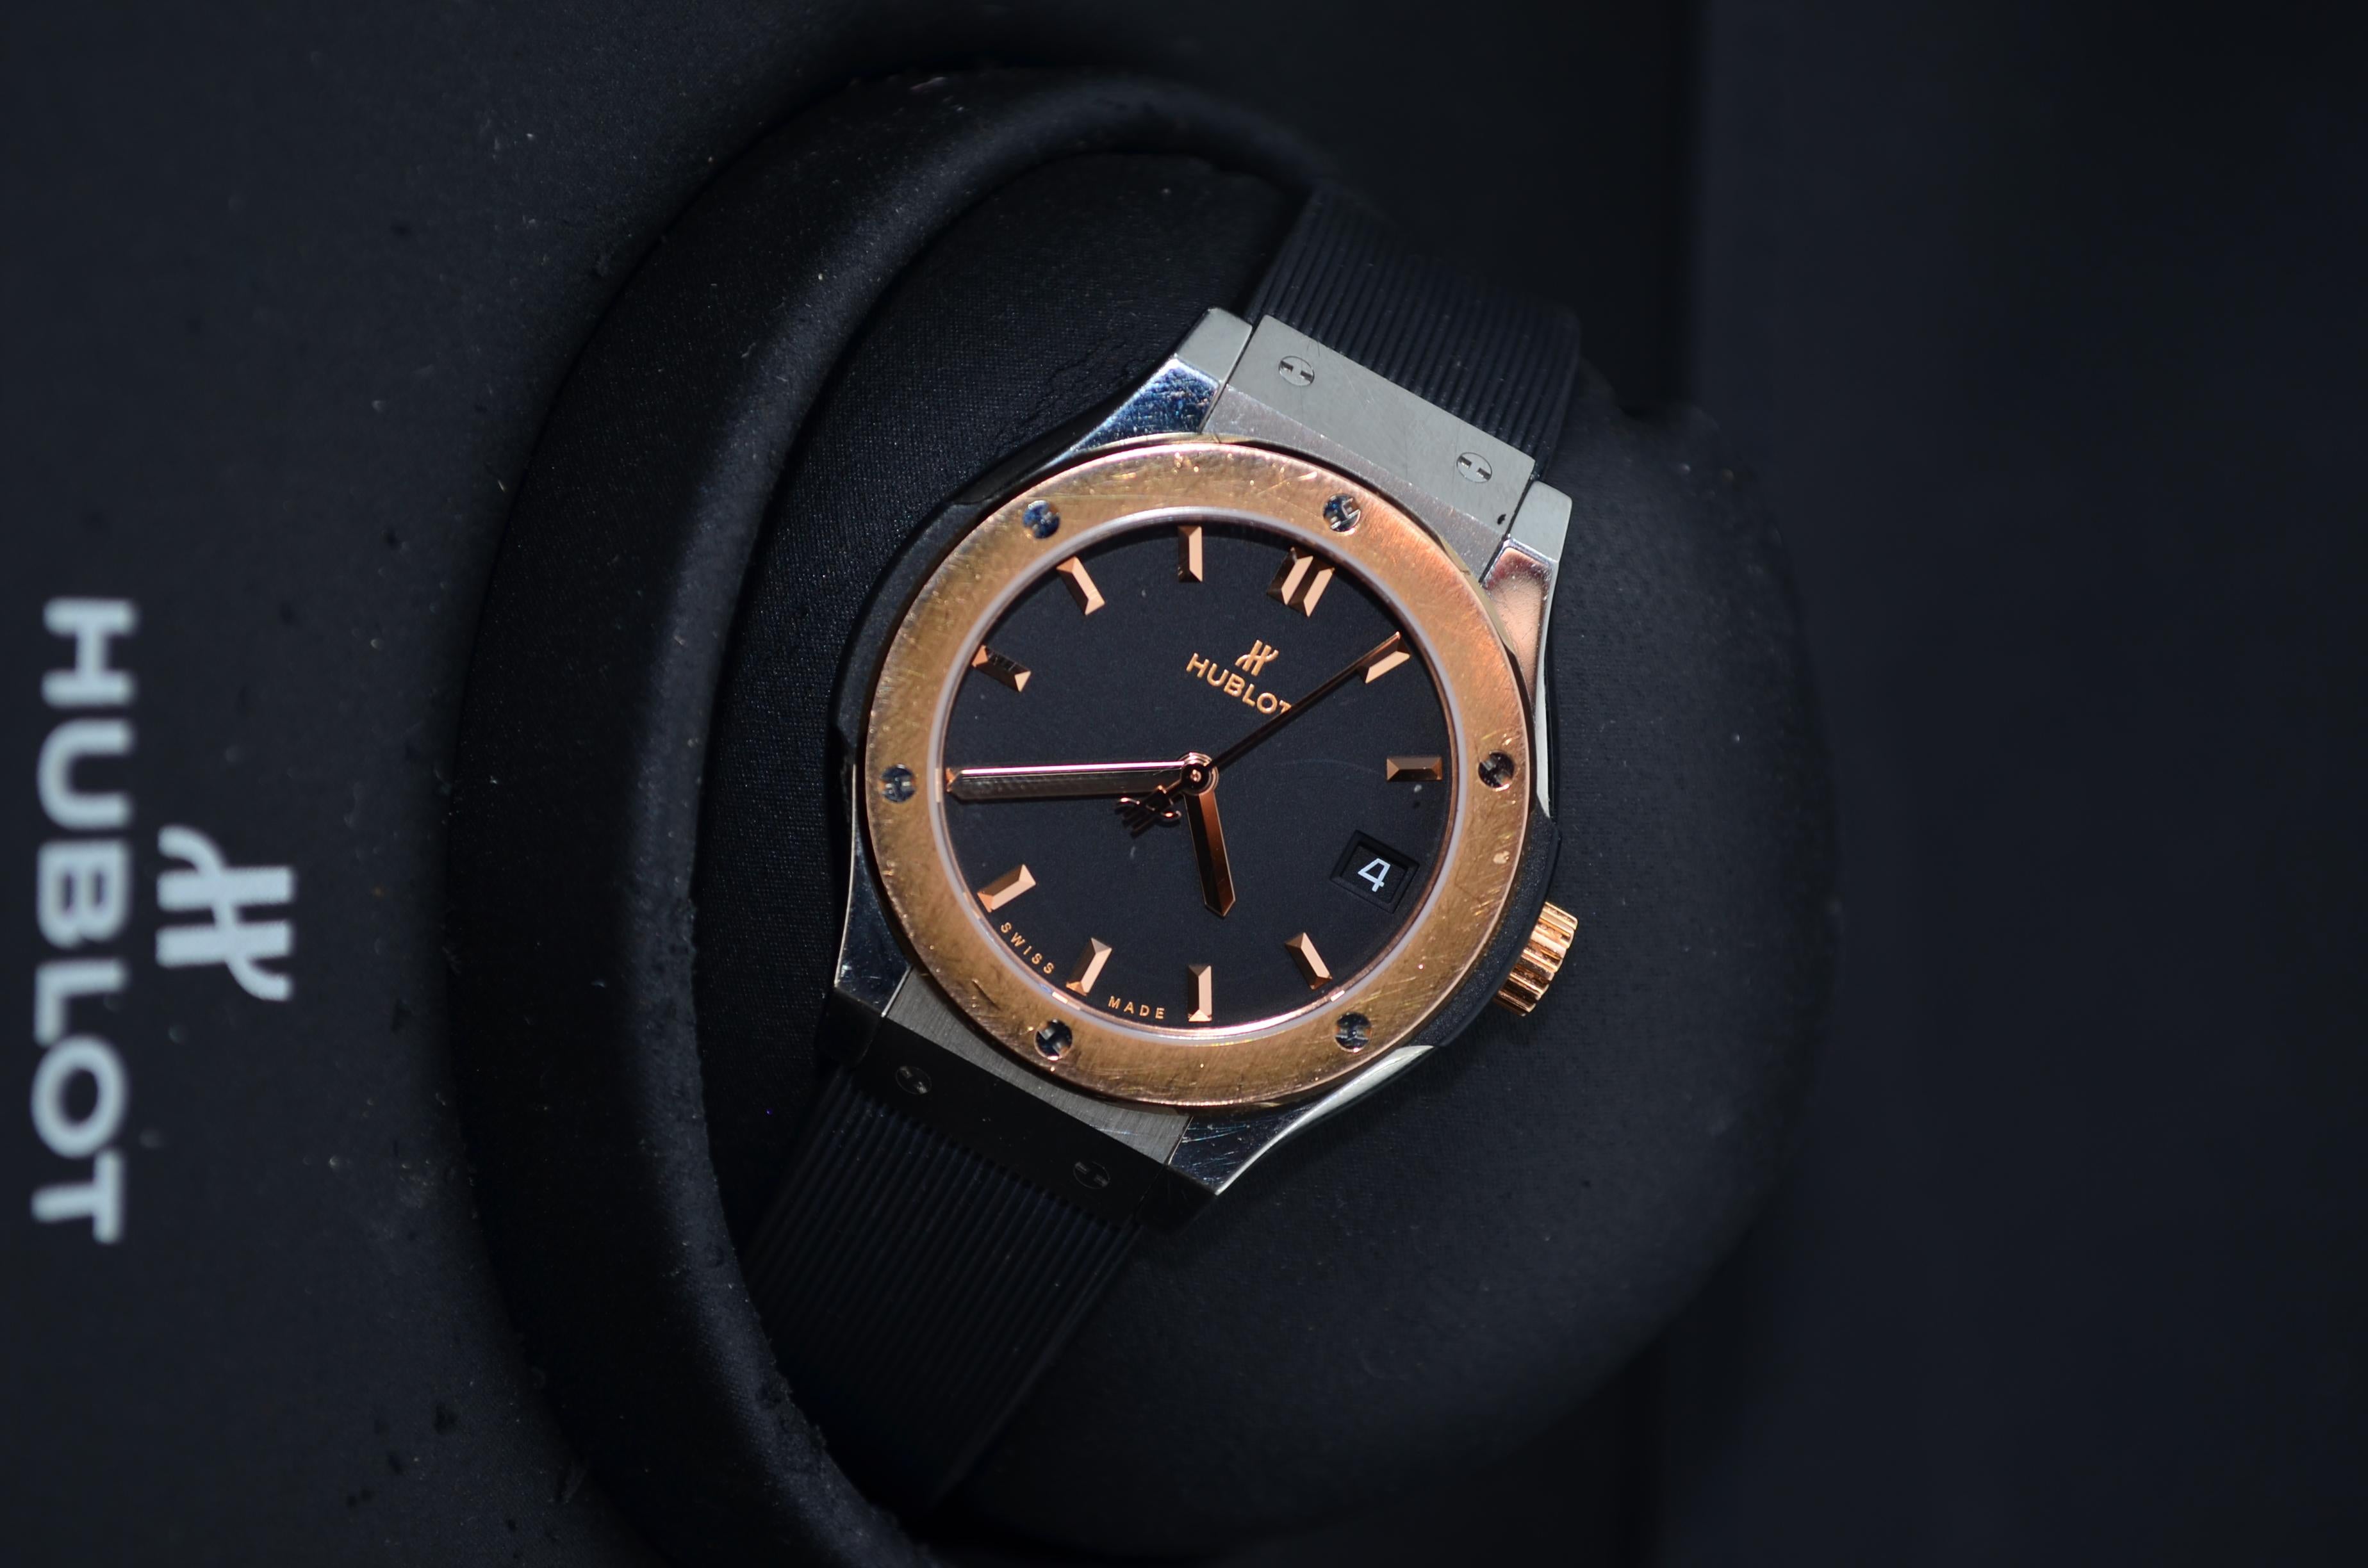 The watch is in a very good condition and it’s working well. It shows slight signs of wear and scratches. The watch comes with the original box and documents, along with an AGS Jewelry warranty card. Hublot was founded in 1980 by Carlo Crocco, an